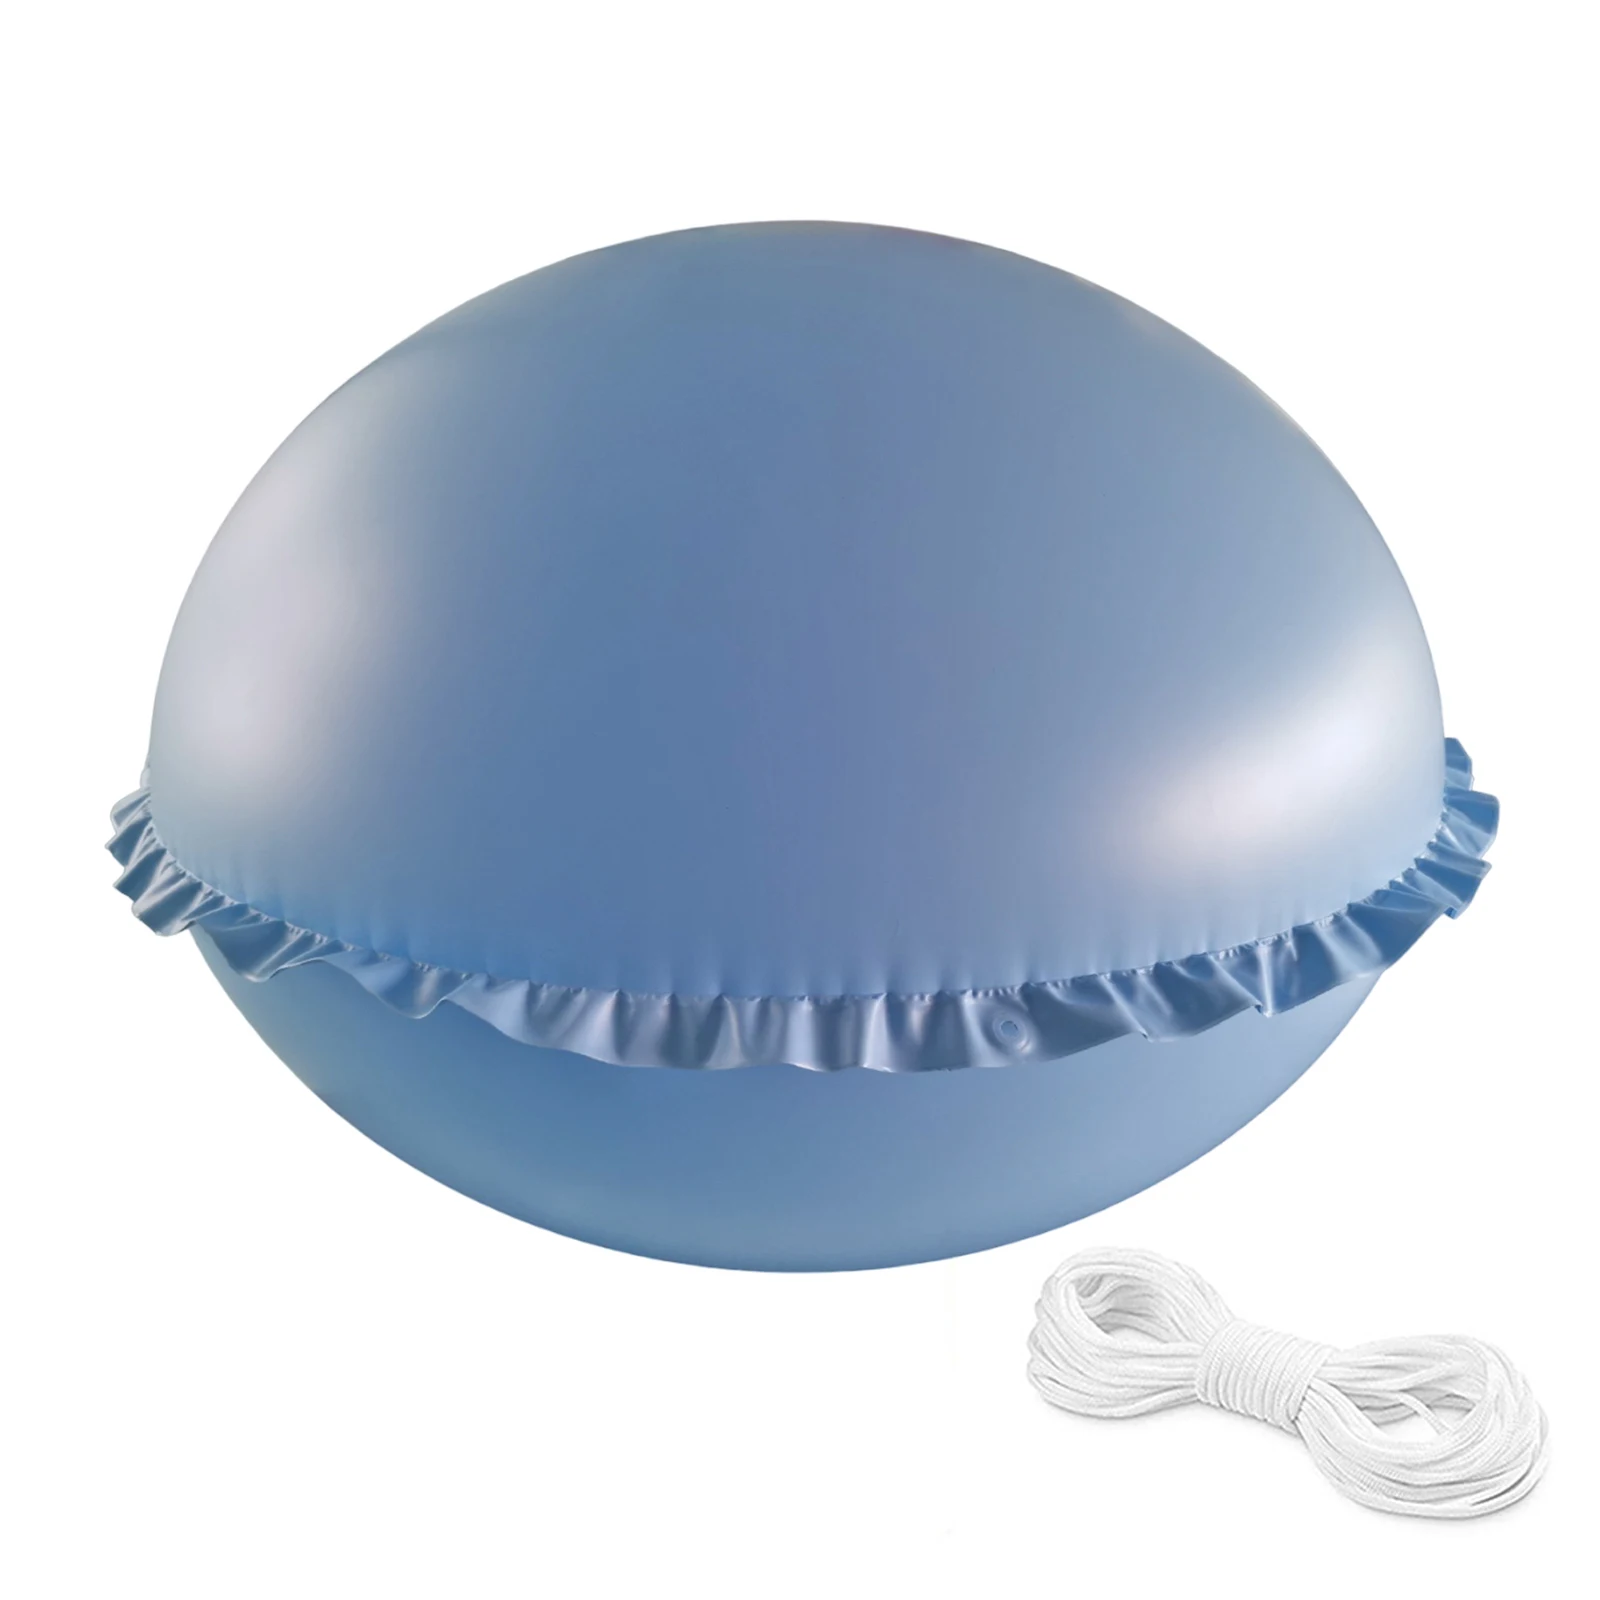 

Pool Pillows Air Pillow 15m Rope Cold-resistant Preventing Freezing Round Cover Water Pillow For Above Ground Pools